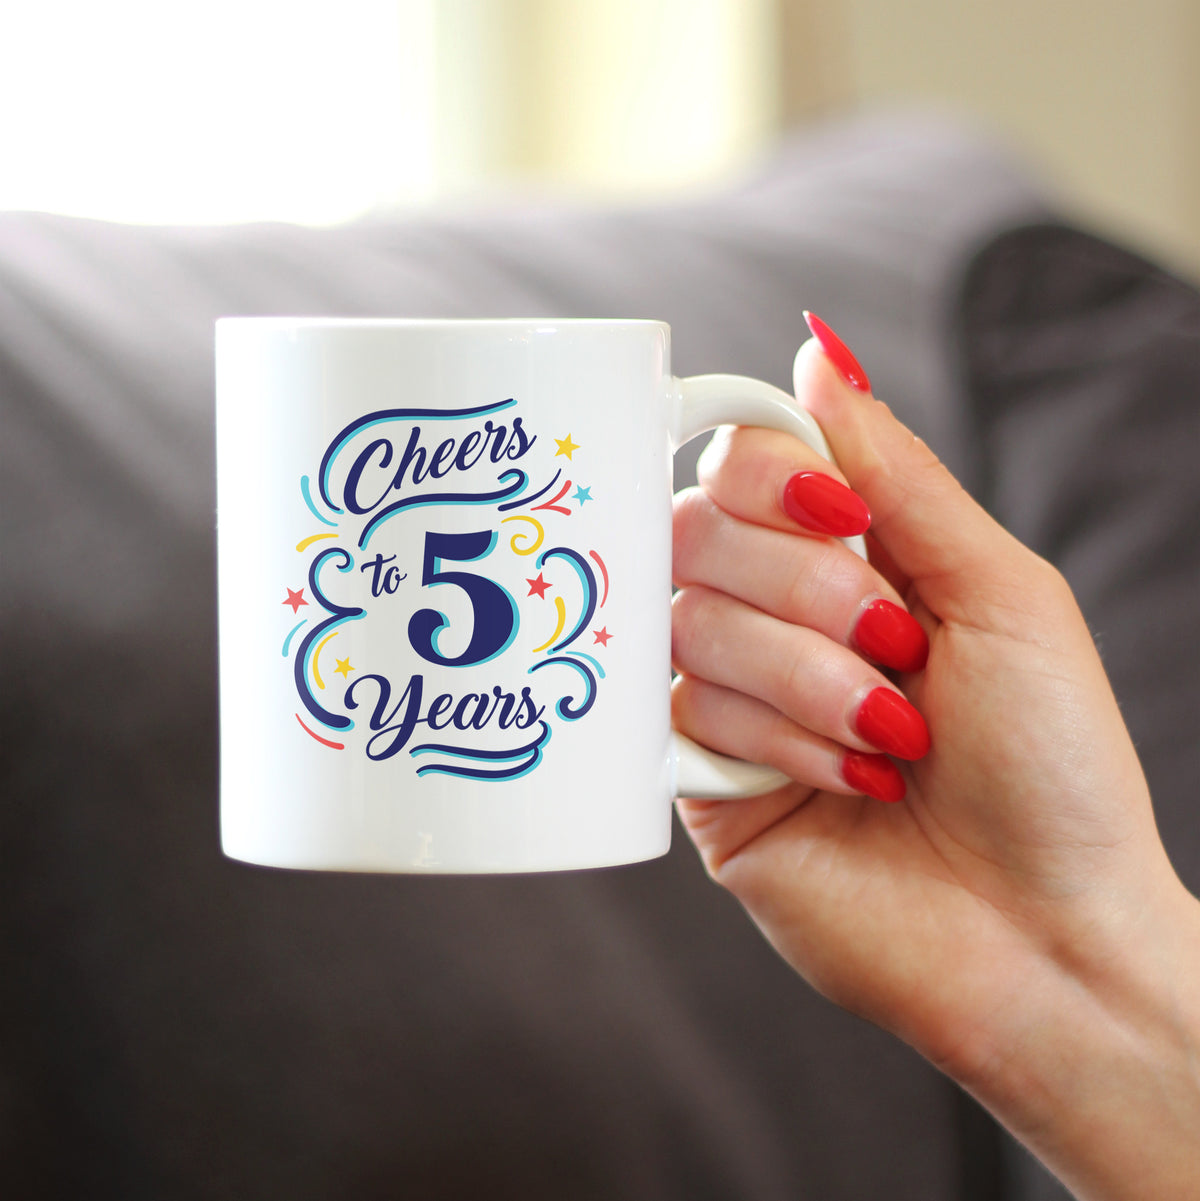 Cheers to 5 Years - Coffee Mug Gifts for Women &amp; Men - 5th Anniversary Party Decor